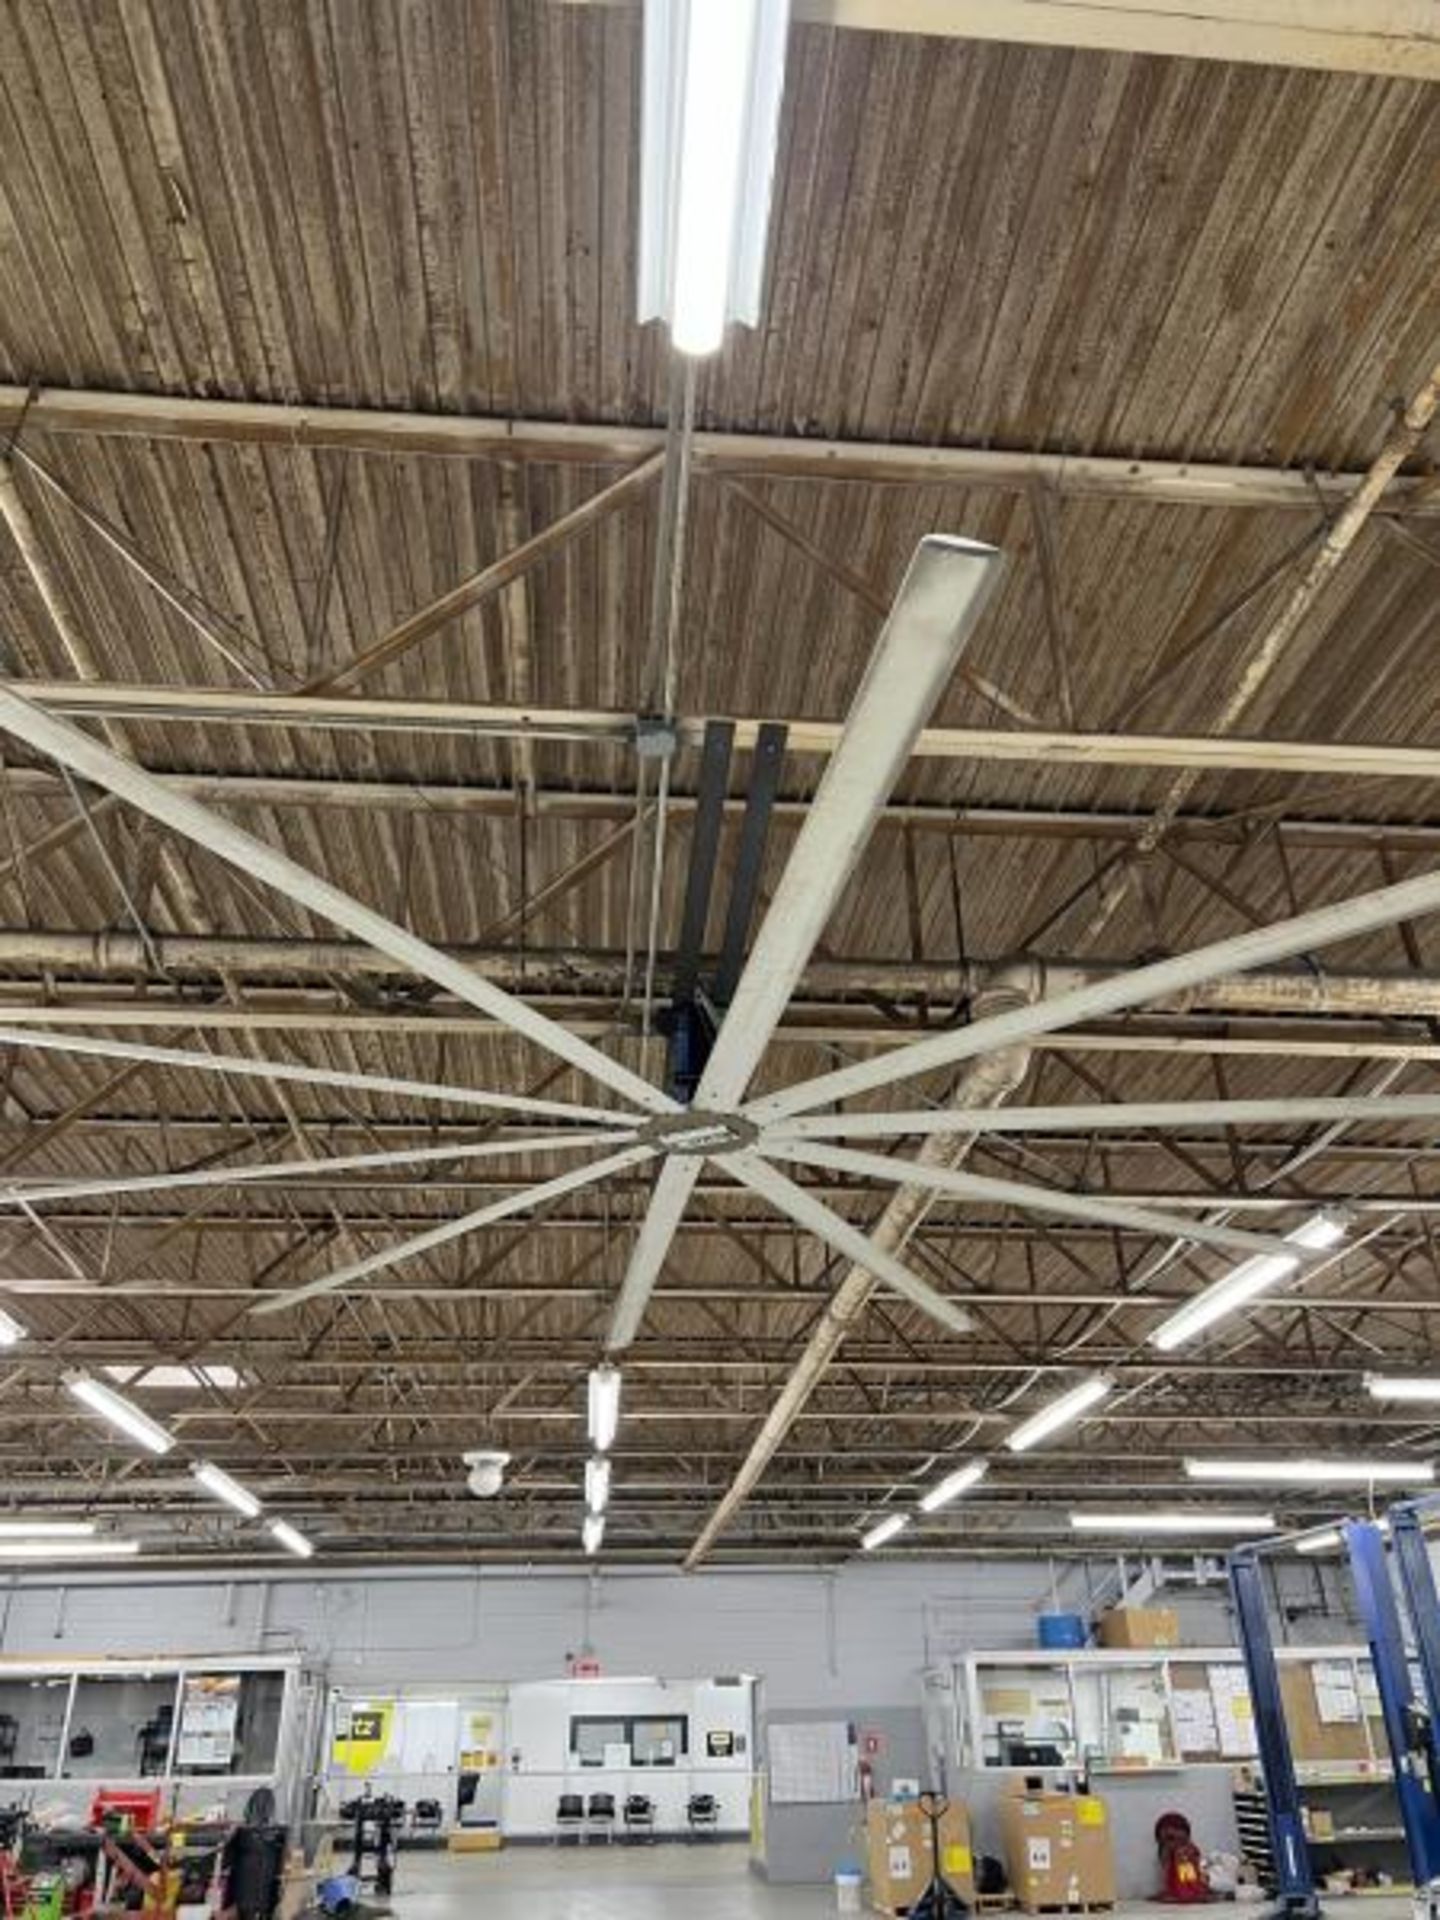 Ceiling Mounted HVLS Large Overhead Shop Fan with (10) Blades; Approx 24' Diameter